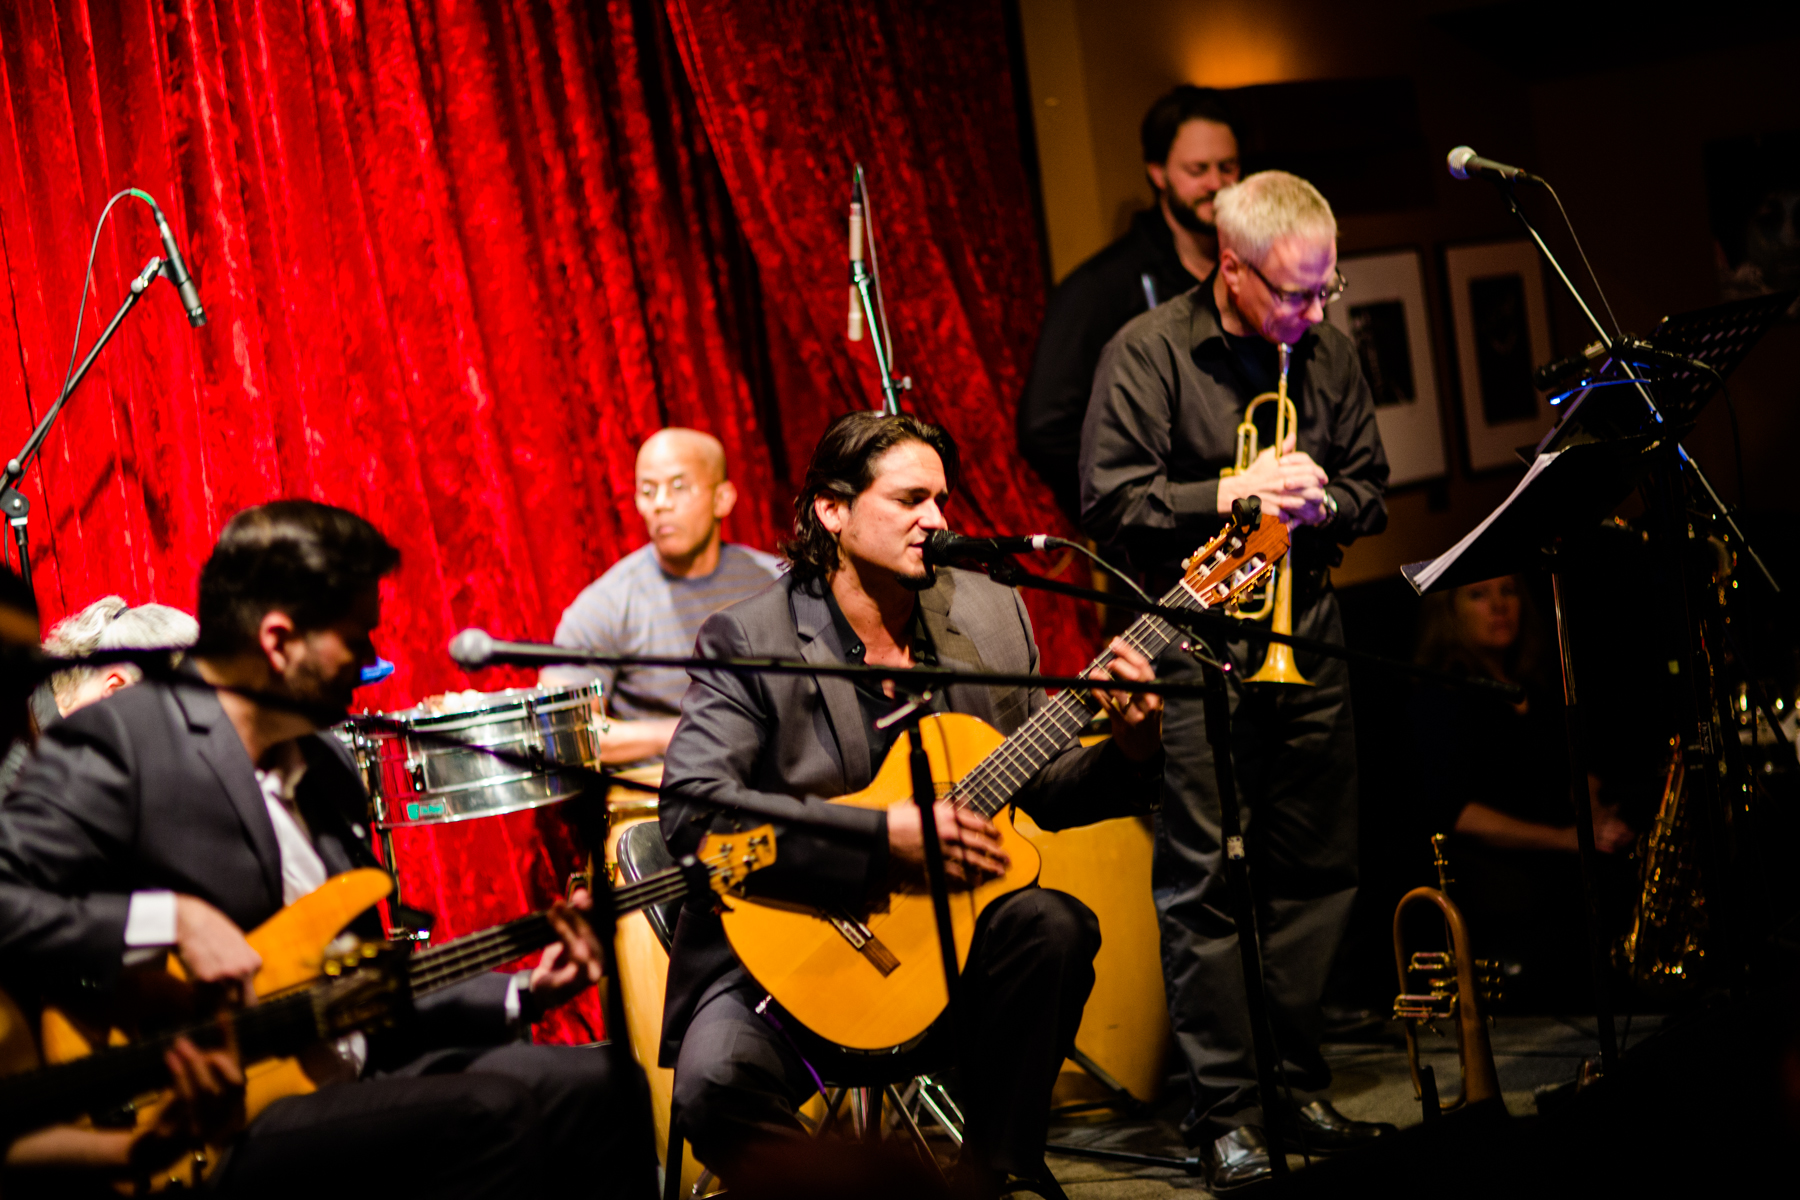 Latin, funk band, Sabrosa, plays music in front of a red curtain